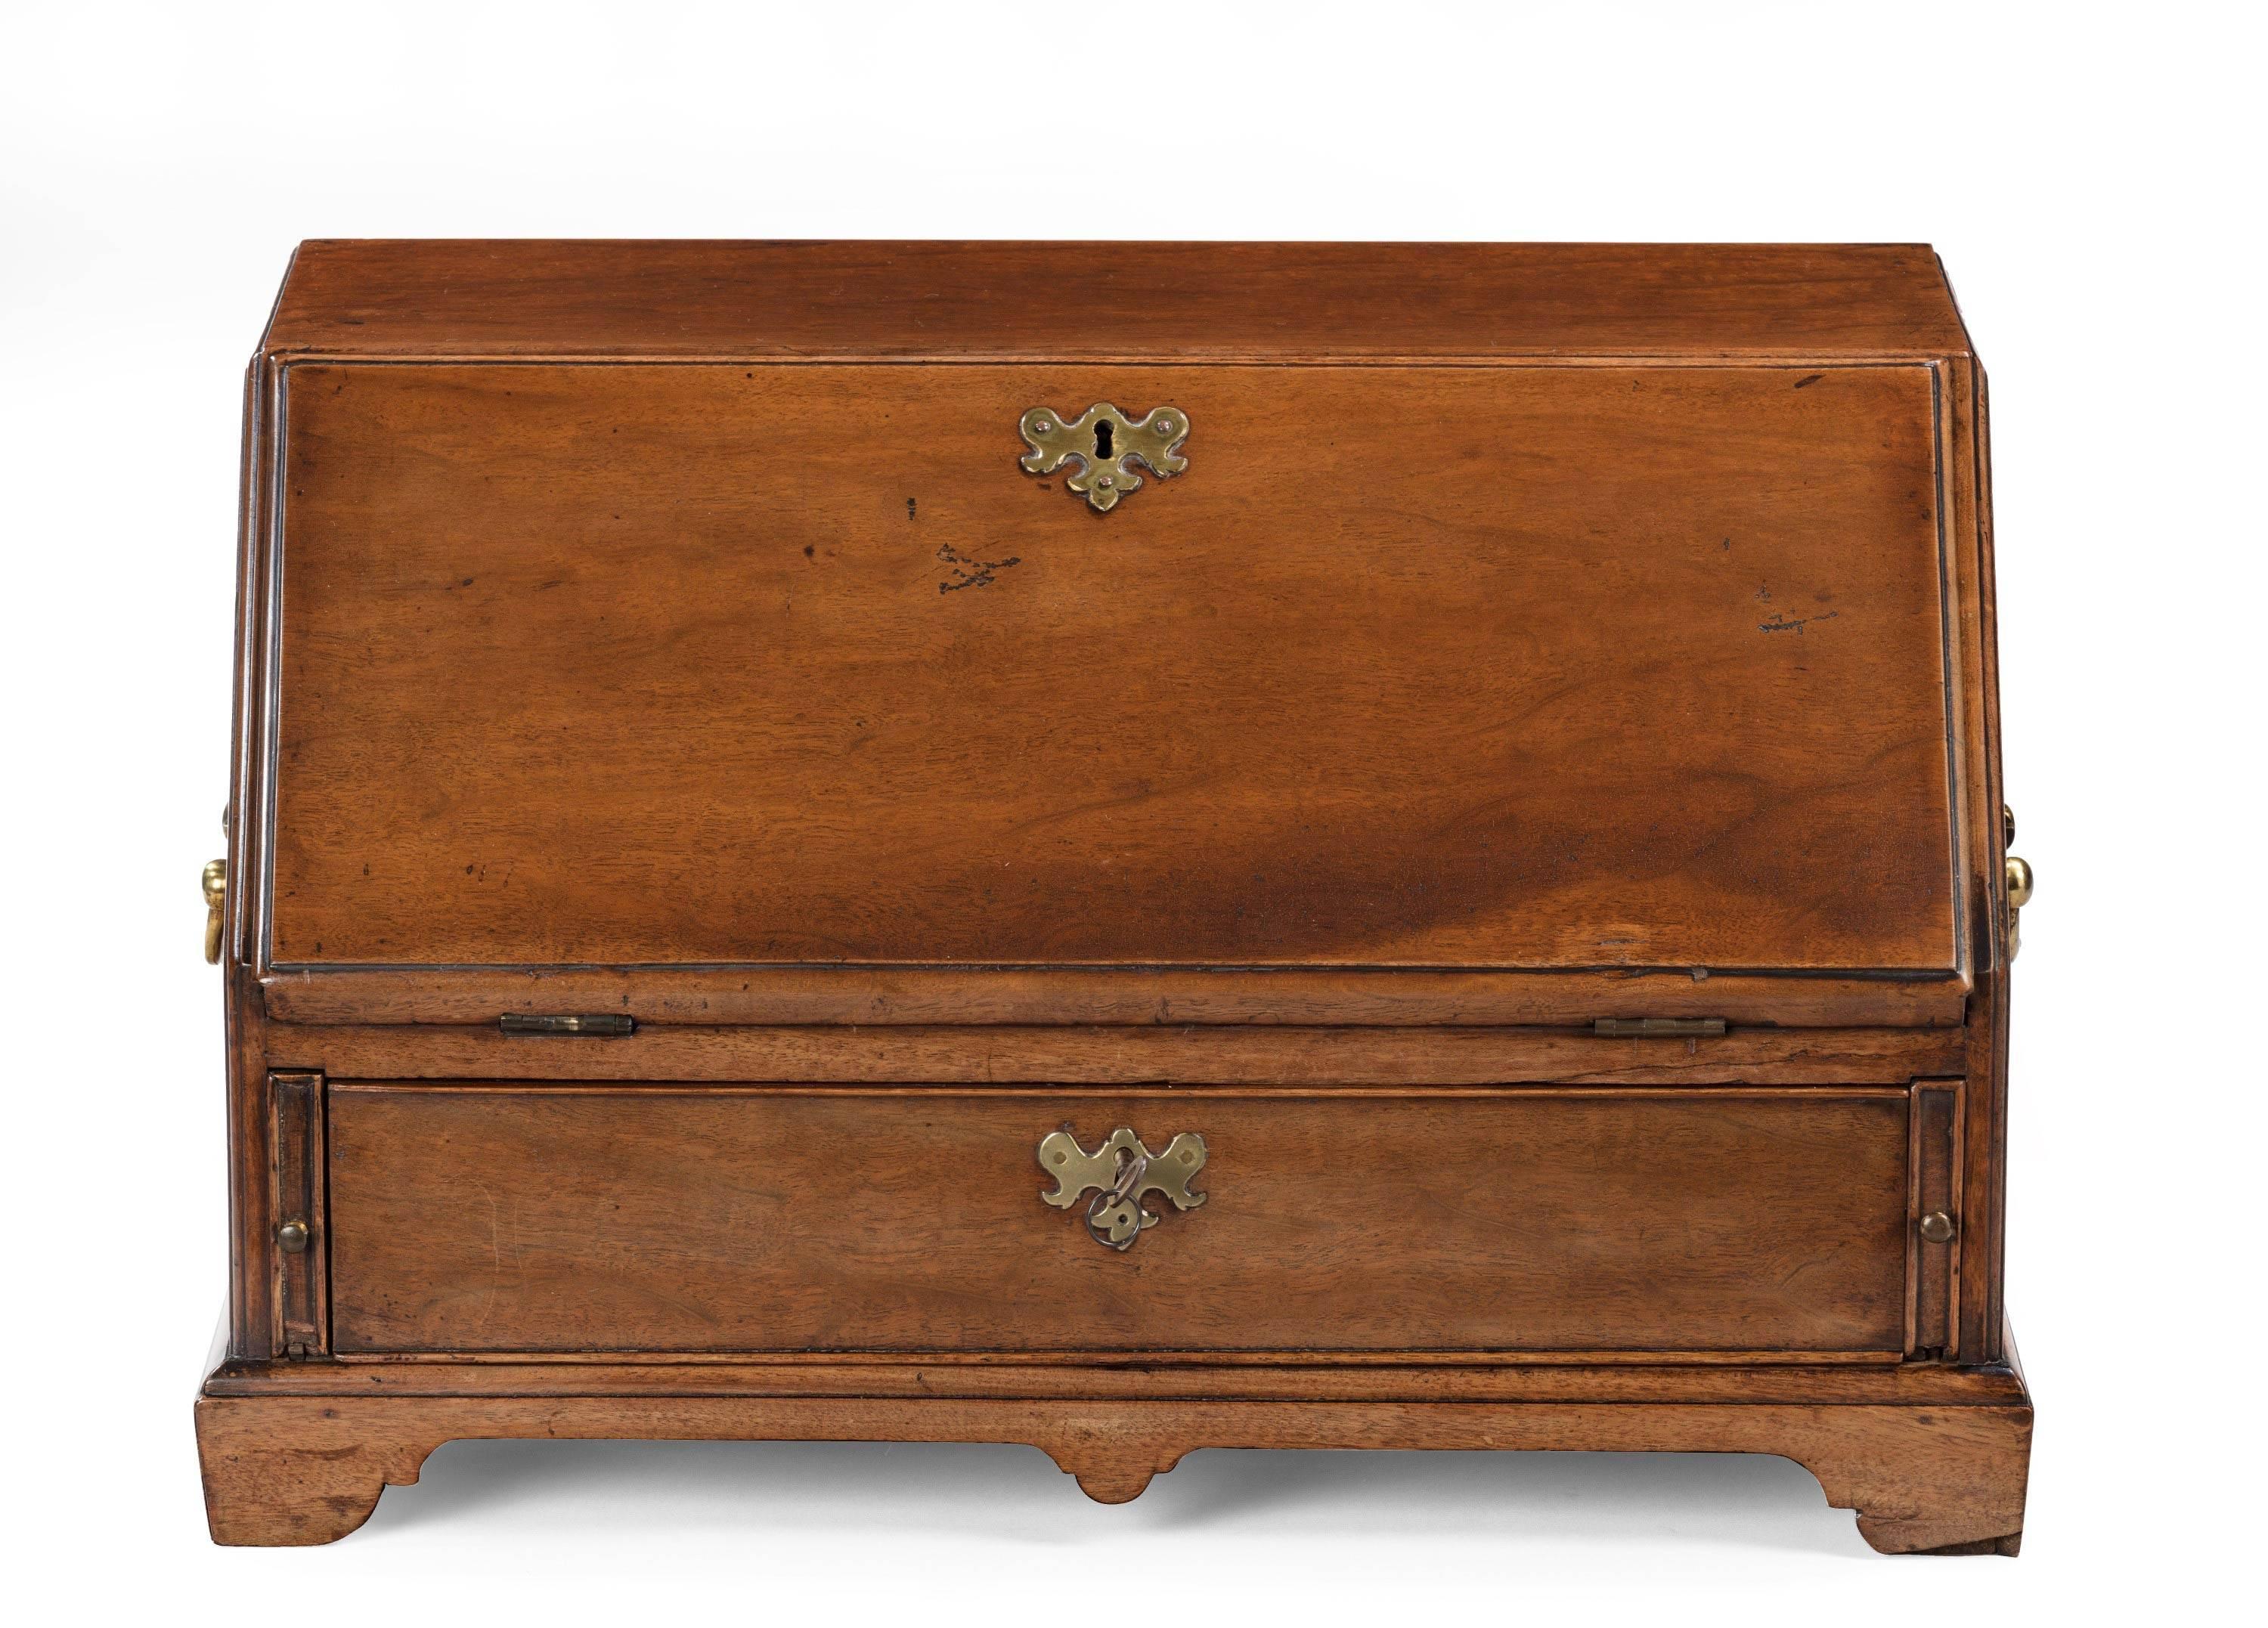 An extremely good and rare George III mahogany table bureau. With the most wonderful shaped serpentine interior. The outer case evenly faded and patinated, 1760.